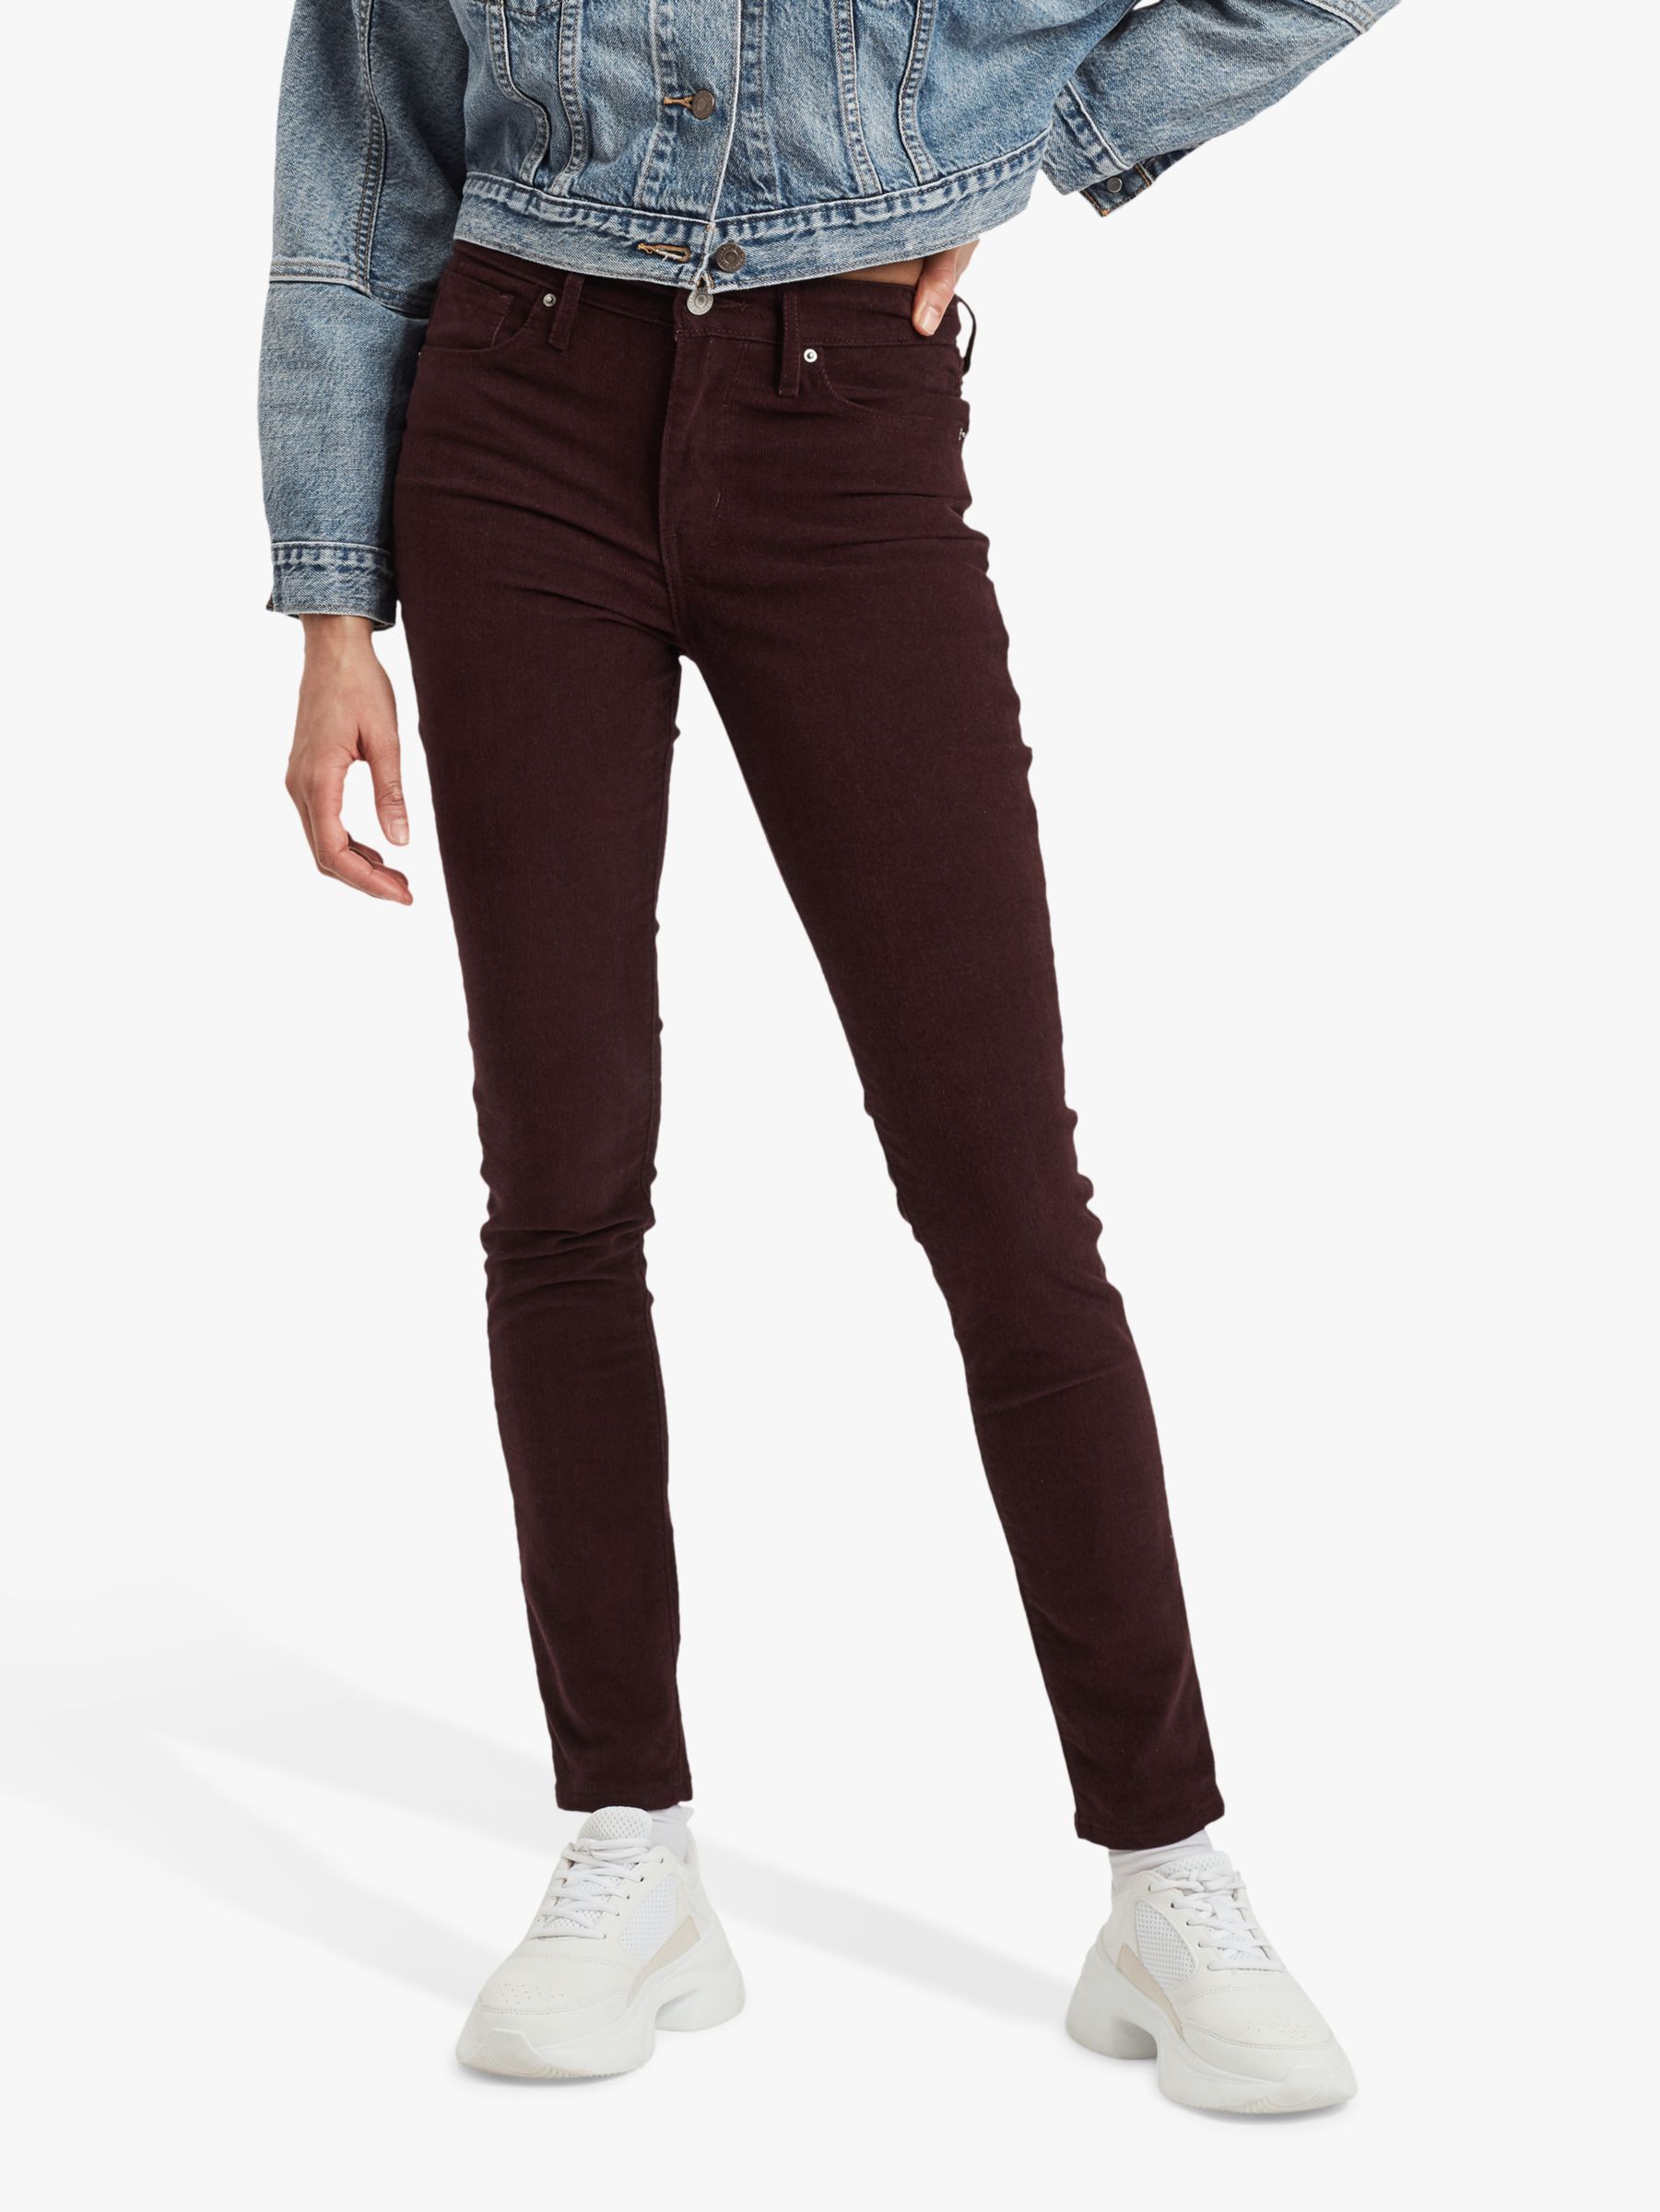 skinny cords womens jeans